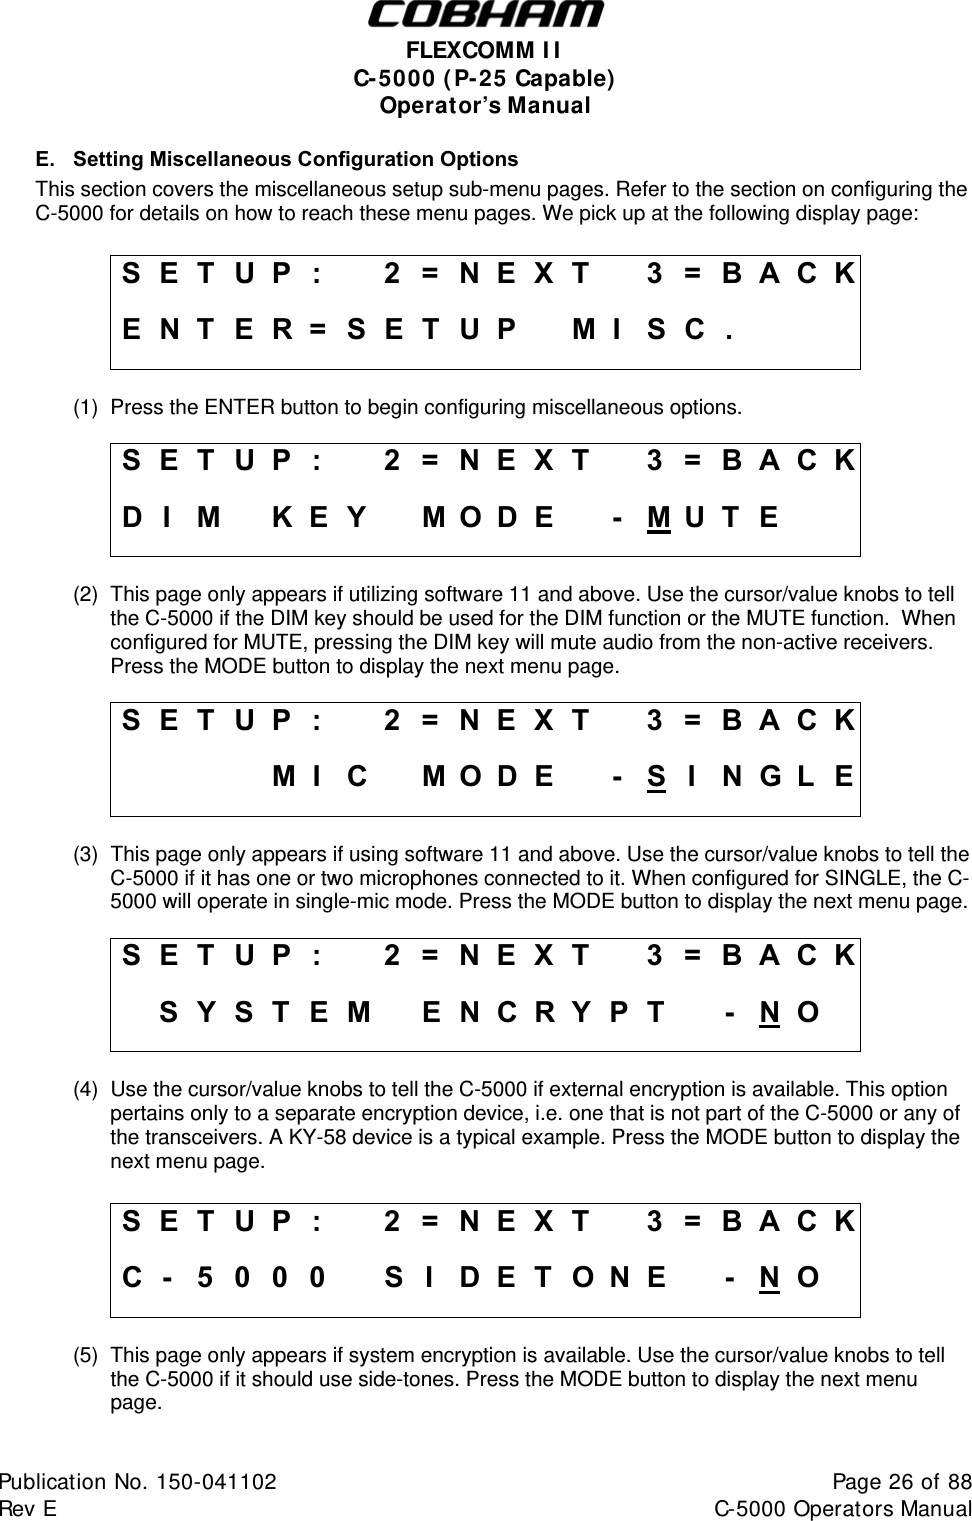  FLEXCOMM II C-5000 (P-25 Capable) Operator’s Manual E.  Setting Miscellaneous Configuration Options This section covers the miscellaneous setup sub-menu pages. Refer to the section on configuring the C-5000 for details on how to reach these menu pages. We pick up at the following display page:  S E T  U P  :    2 = N E X T   3 = B A C K E N T E R = SETUP   MI SC.      (1)  Press the ENTER button to begin configuring miscellaneous options.  S E T  U P  :    2 = N E X T   3 = B A C K D I M  K E Y  M O D E  - M UTE    (2)  This page only appears if utilizing software 11 and above. Use the cursor/value knobs to tell the C-5000 if the DIM key should be used for the DIM function or the MUTE function.  When configured for MUTE, pressing the DIM key will mute audio from the non-active receivers.  Press the MODE button to display the next menu page.  S E T  U P  :    2 = N E X T   3 = B A C K     M I C MODE -SIN G L E (3)  This page only appears if using software 11 and above. Use the cursor/value knobs to tell the C-5000 if it has one or two microphones connected to it. When configured for SINGLE, the C-5000 will operate in single-mic mode. Press the MODE button to display the next menu page.  S E T  U P  :    2 = N E X T   3 = B A C K   S Y S T E M   E N C R Y P T   - N O   (4)  Use the cursor/value knobs to tell the C-5000 if external encryption is available. This option pertains only to a separate encryption device, i.e. one that is not part of the C-5000 or any of the transceivers. A KY-58 device is a typical example. Press the MODE button to display the next menu page.  S E T  U P  :    2 = N E X T   3 = B A C K C -  5 0 0 0    S I D E T O N E   - N O   (5)  This page only appears if system encryption is available. Use the cursor/value knobs to tell the C-5000 if it should use side-tones. Press the MODE button to display the next menu page.  Publication No. 150-041102  Page 26 of 88  Rev E  C-5000 Operators Manual    